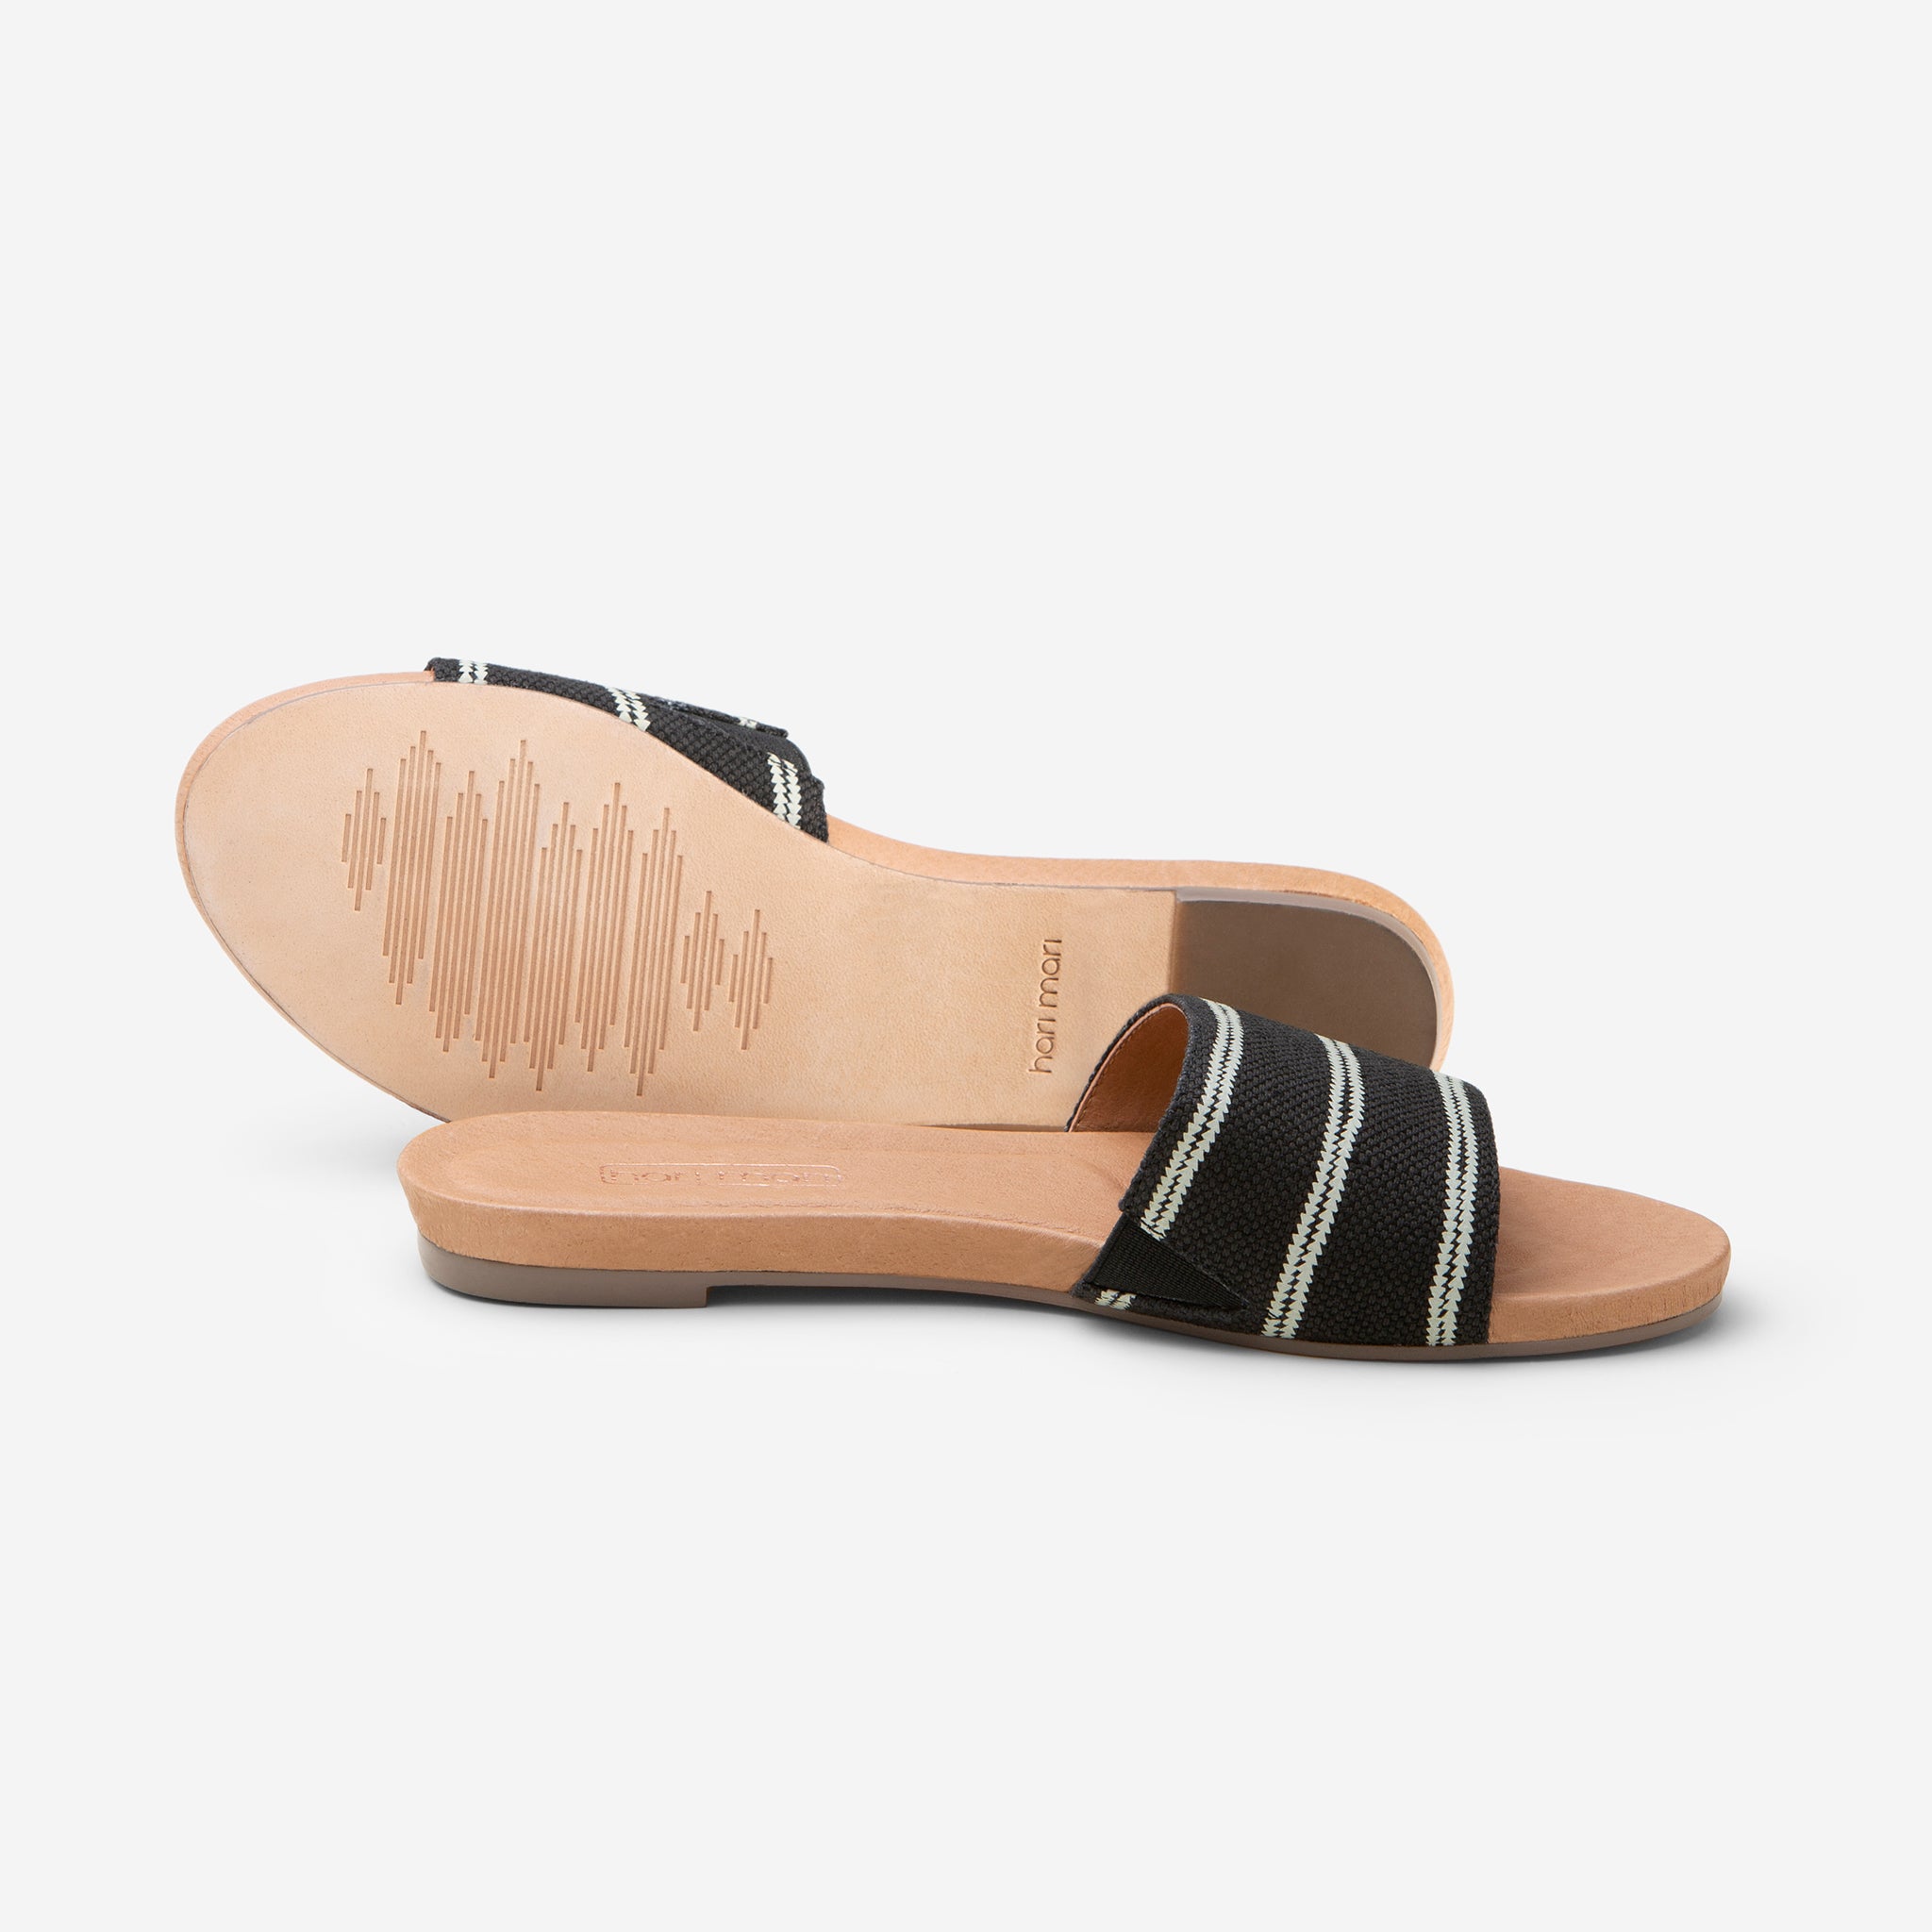 Hari Mari Women's Sydney Woven Sandal in Black showing sandal and bottom of sandal genuine leather outsole on white background